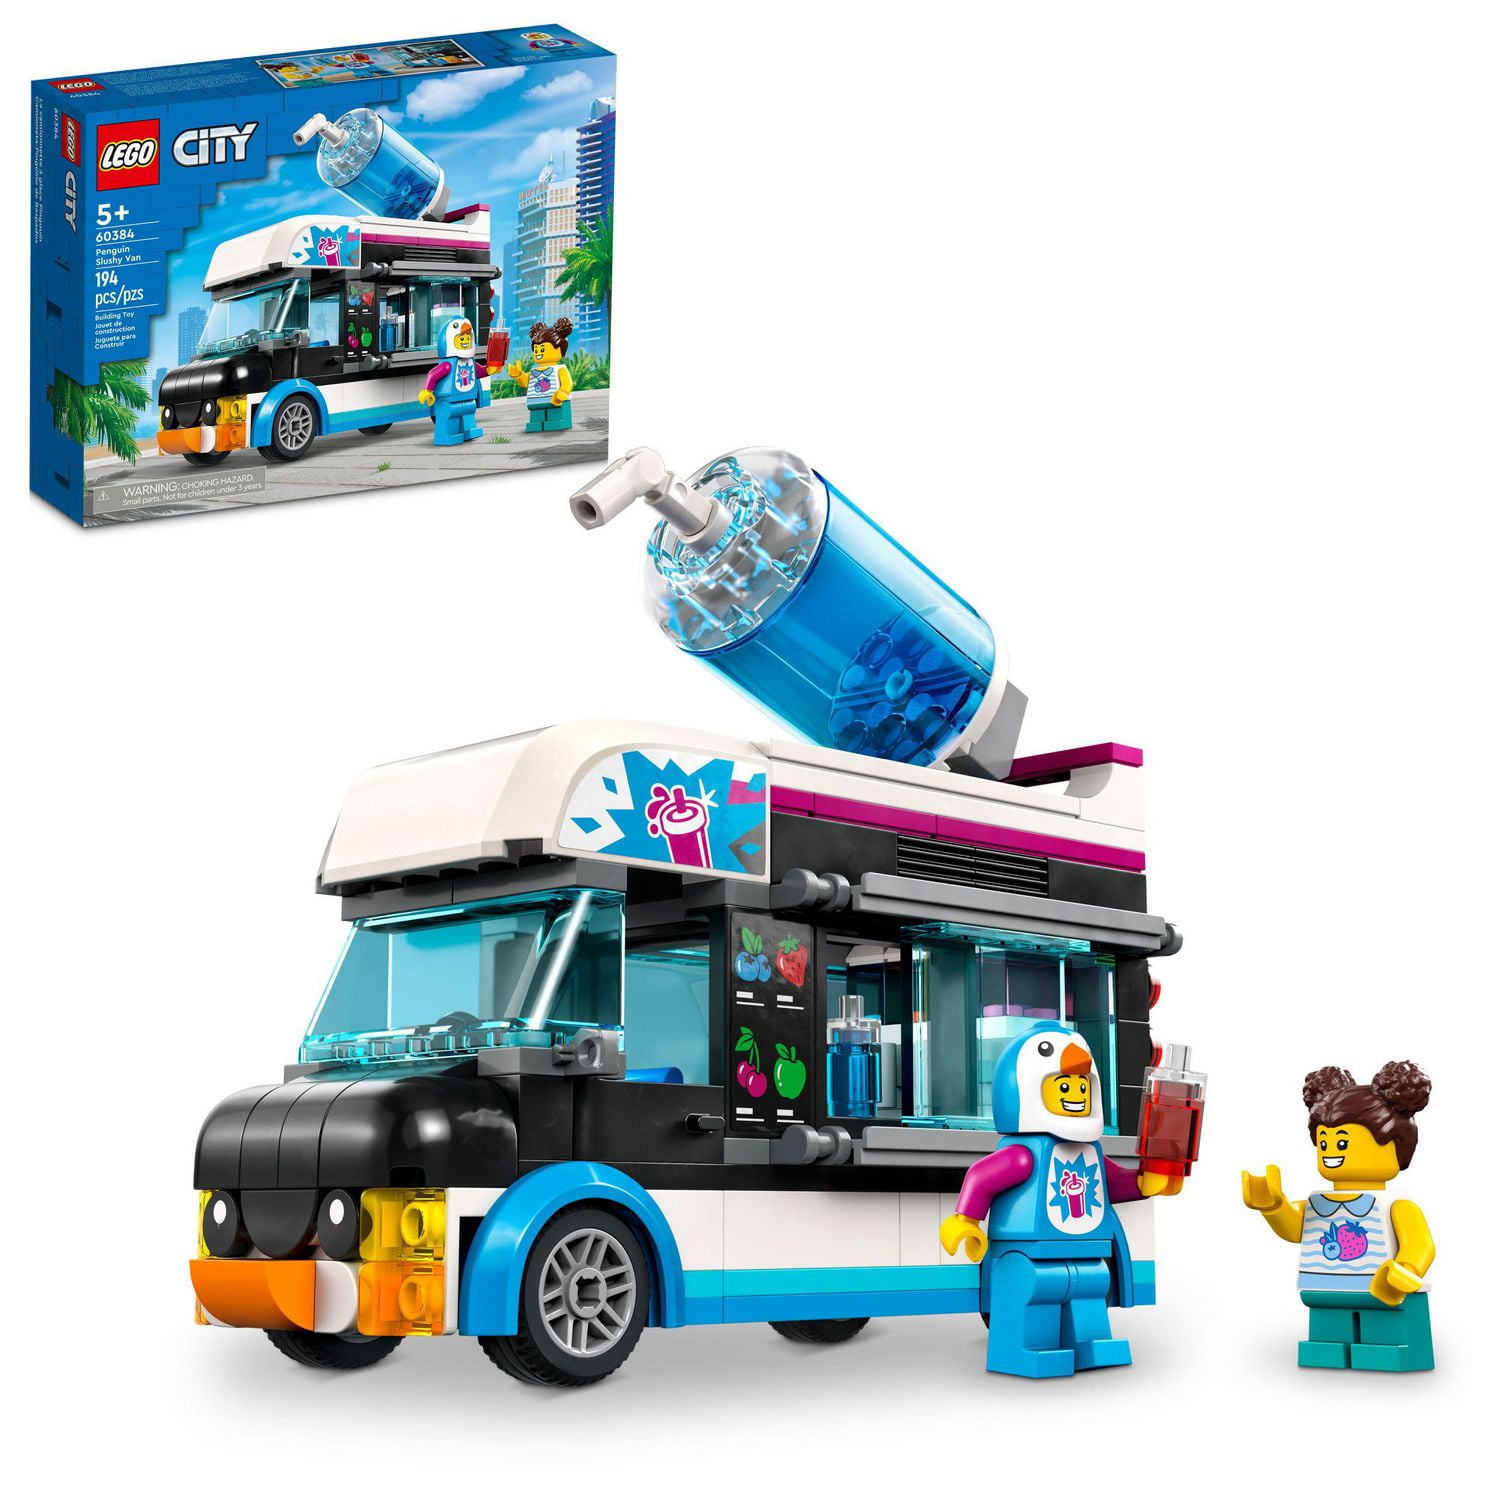 LEGO City Penguin Slushy Van Building Toy, Features a Truck and